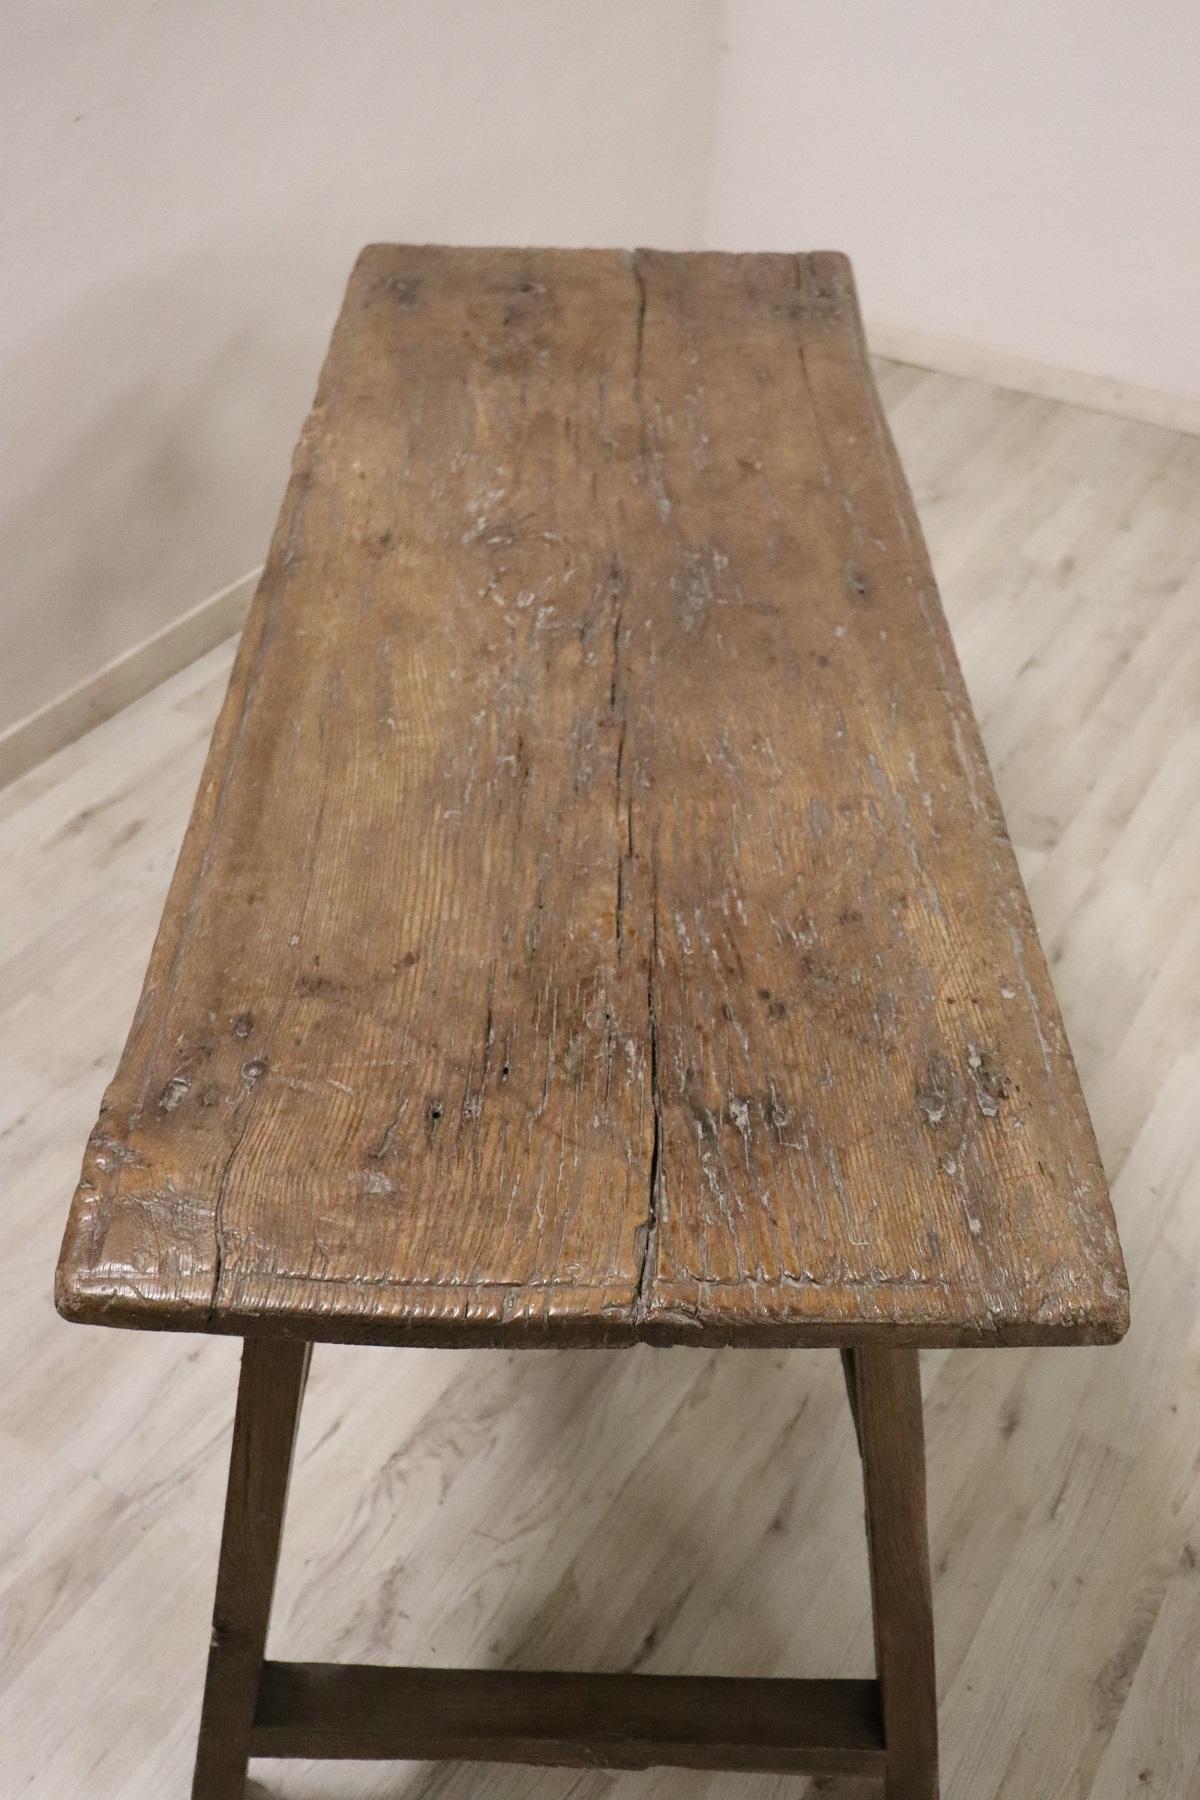 Important antique solid oakwood table from the 17th century. Oakwood has acquired a beautiful antique patina presenting the signs of all the past centuries. This type of table in Italy was called 